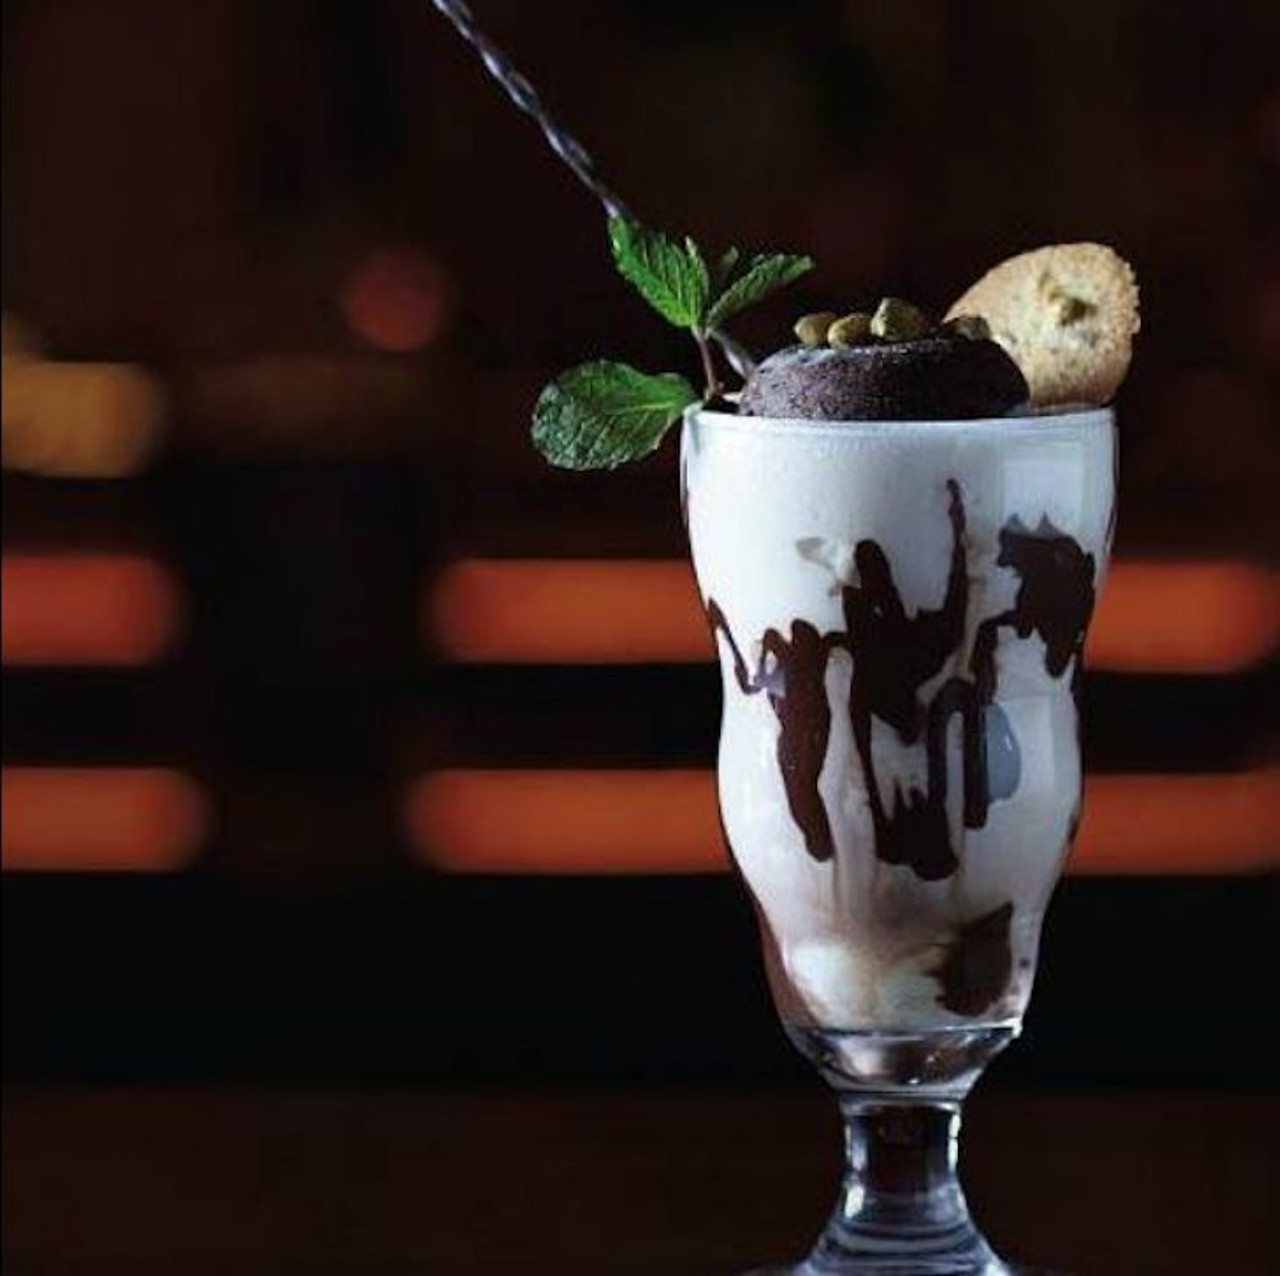 Chocolate Lava Milkshake at Fleming&#146;s Prime Steakhouse & Wine Bar 
933 N. Orlando Ave., Winter Park, 407-699-9463 
A steakhouse may not seem an ideal summer hangout, but you might make an exception for Fleming's boozy Chocolate Lava milkshake, spun from vanilla ice cream, chocolate lava cake and Bulleit rye whiskey. Find it on their bar menu and make happy hour even happier. - JBY 
Photo via Fleming&#146;s Steakhouse/Facebook